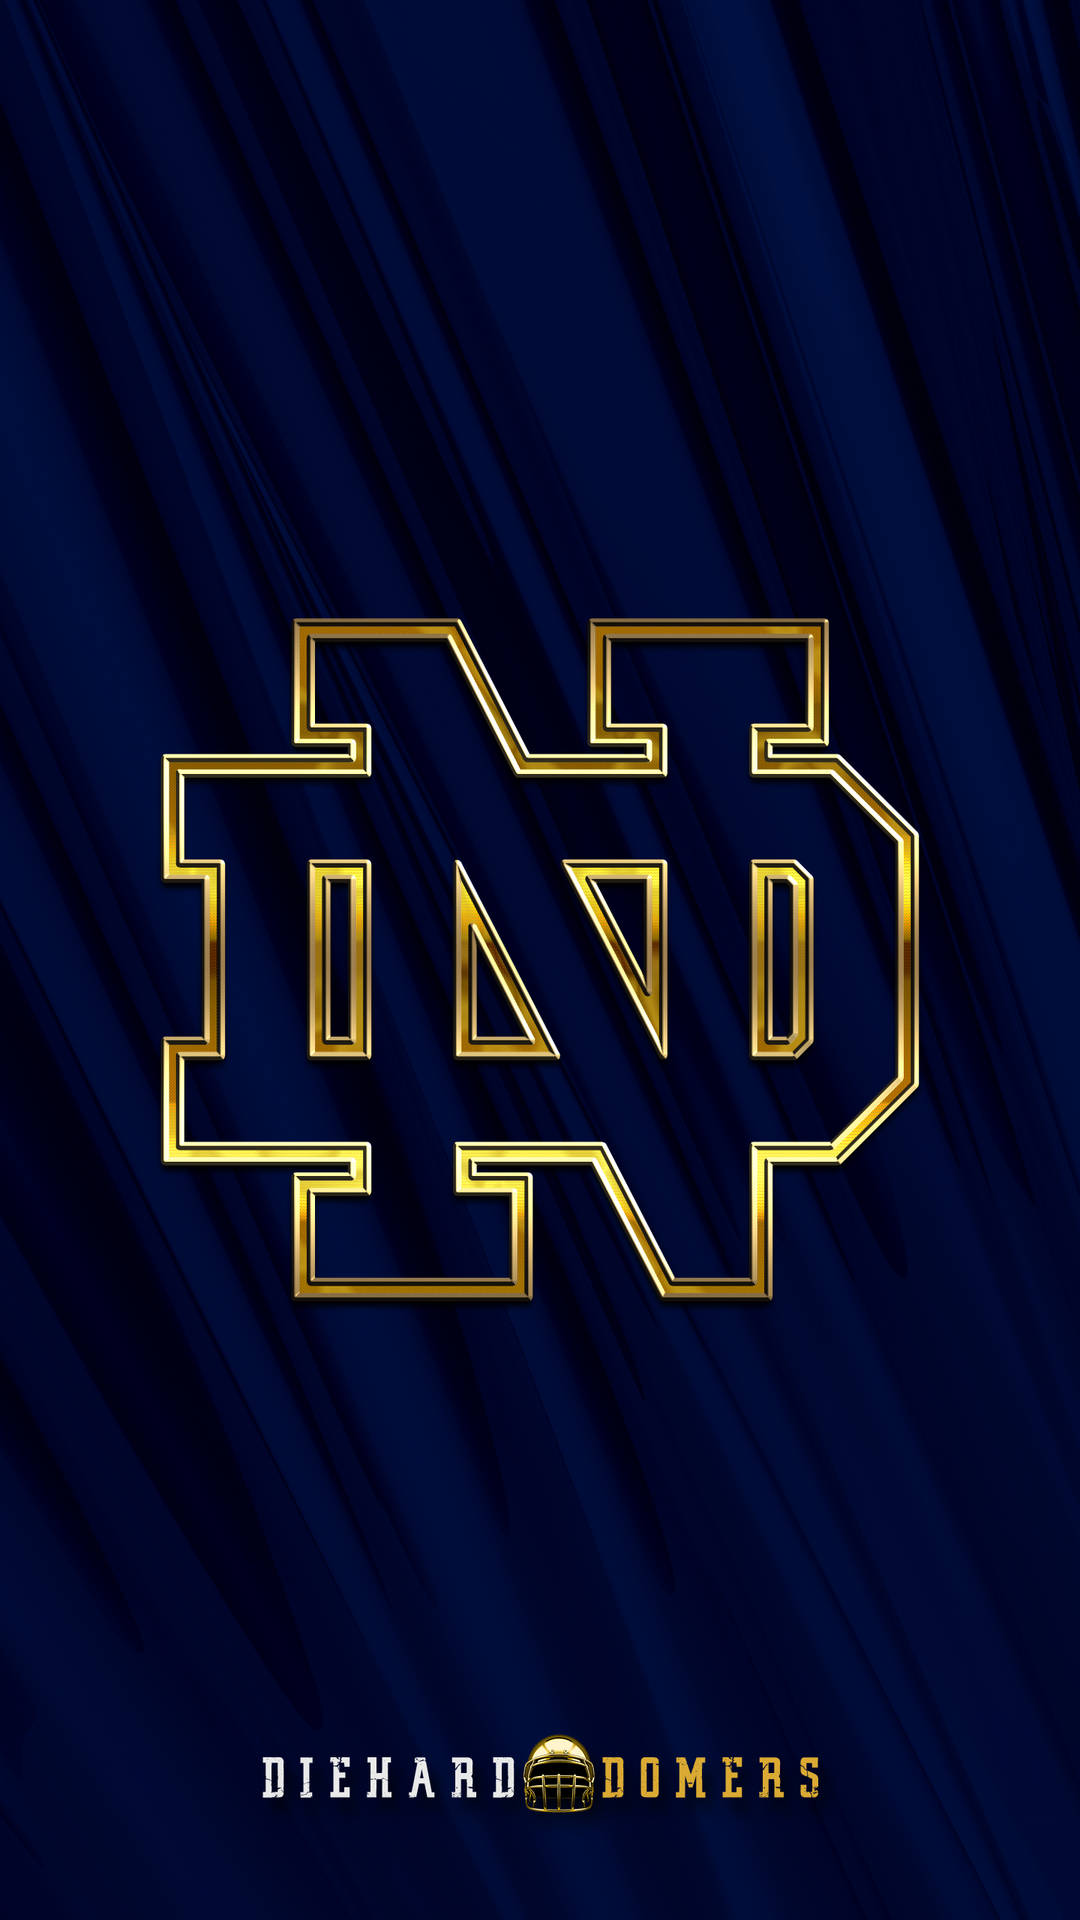 The Fighting Irish Stomping their Way to Victory Wallpaper